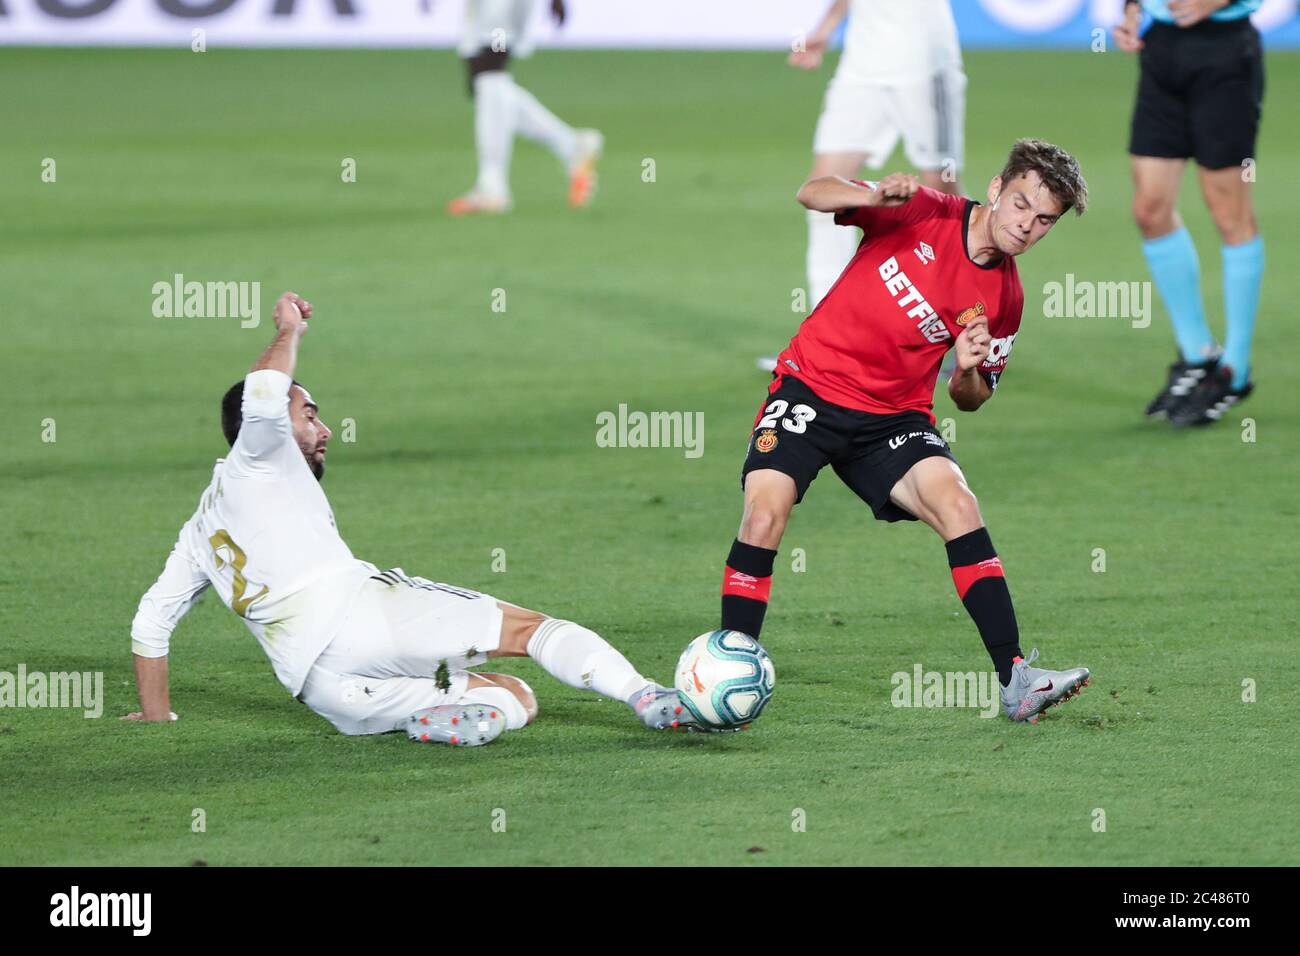 Madrid, Spain. 24th June, 2020. Real Madrid's Carvajal (L) vies with Mallorca's Aleix Febas during a Spanish league football match between Real Madrid and Mallorca in Madrid, Spain, June 24, 2020. Credit: Edward F. Peters/Xinhua/Alamy Live News Stock Photo